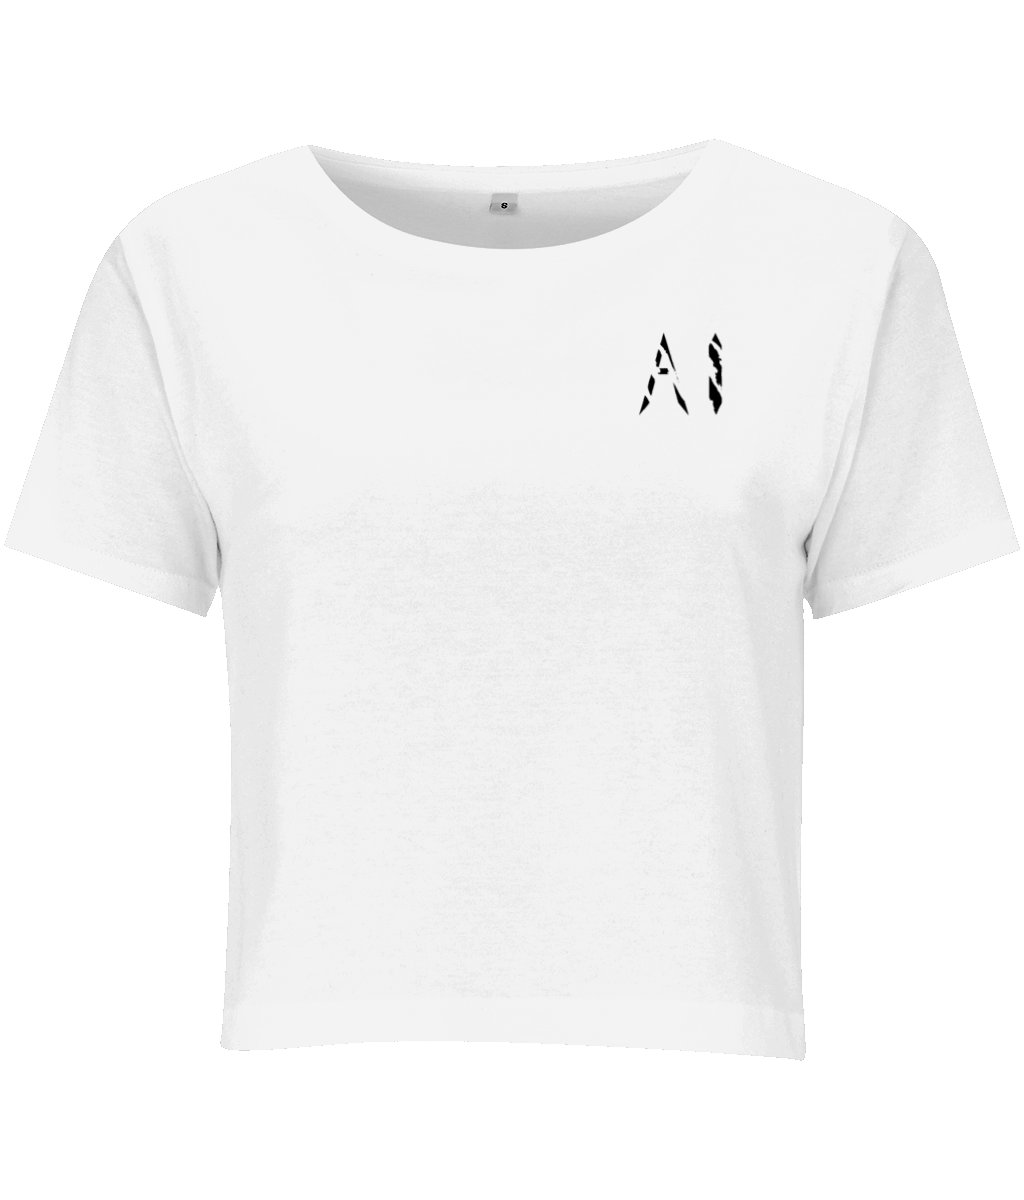 Womens Cropped Tee White with black AI logo on left breast